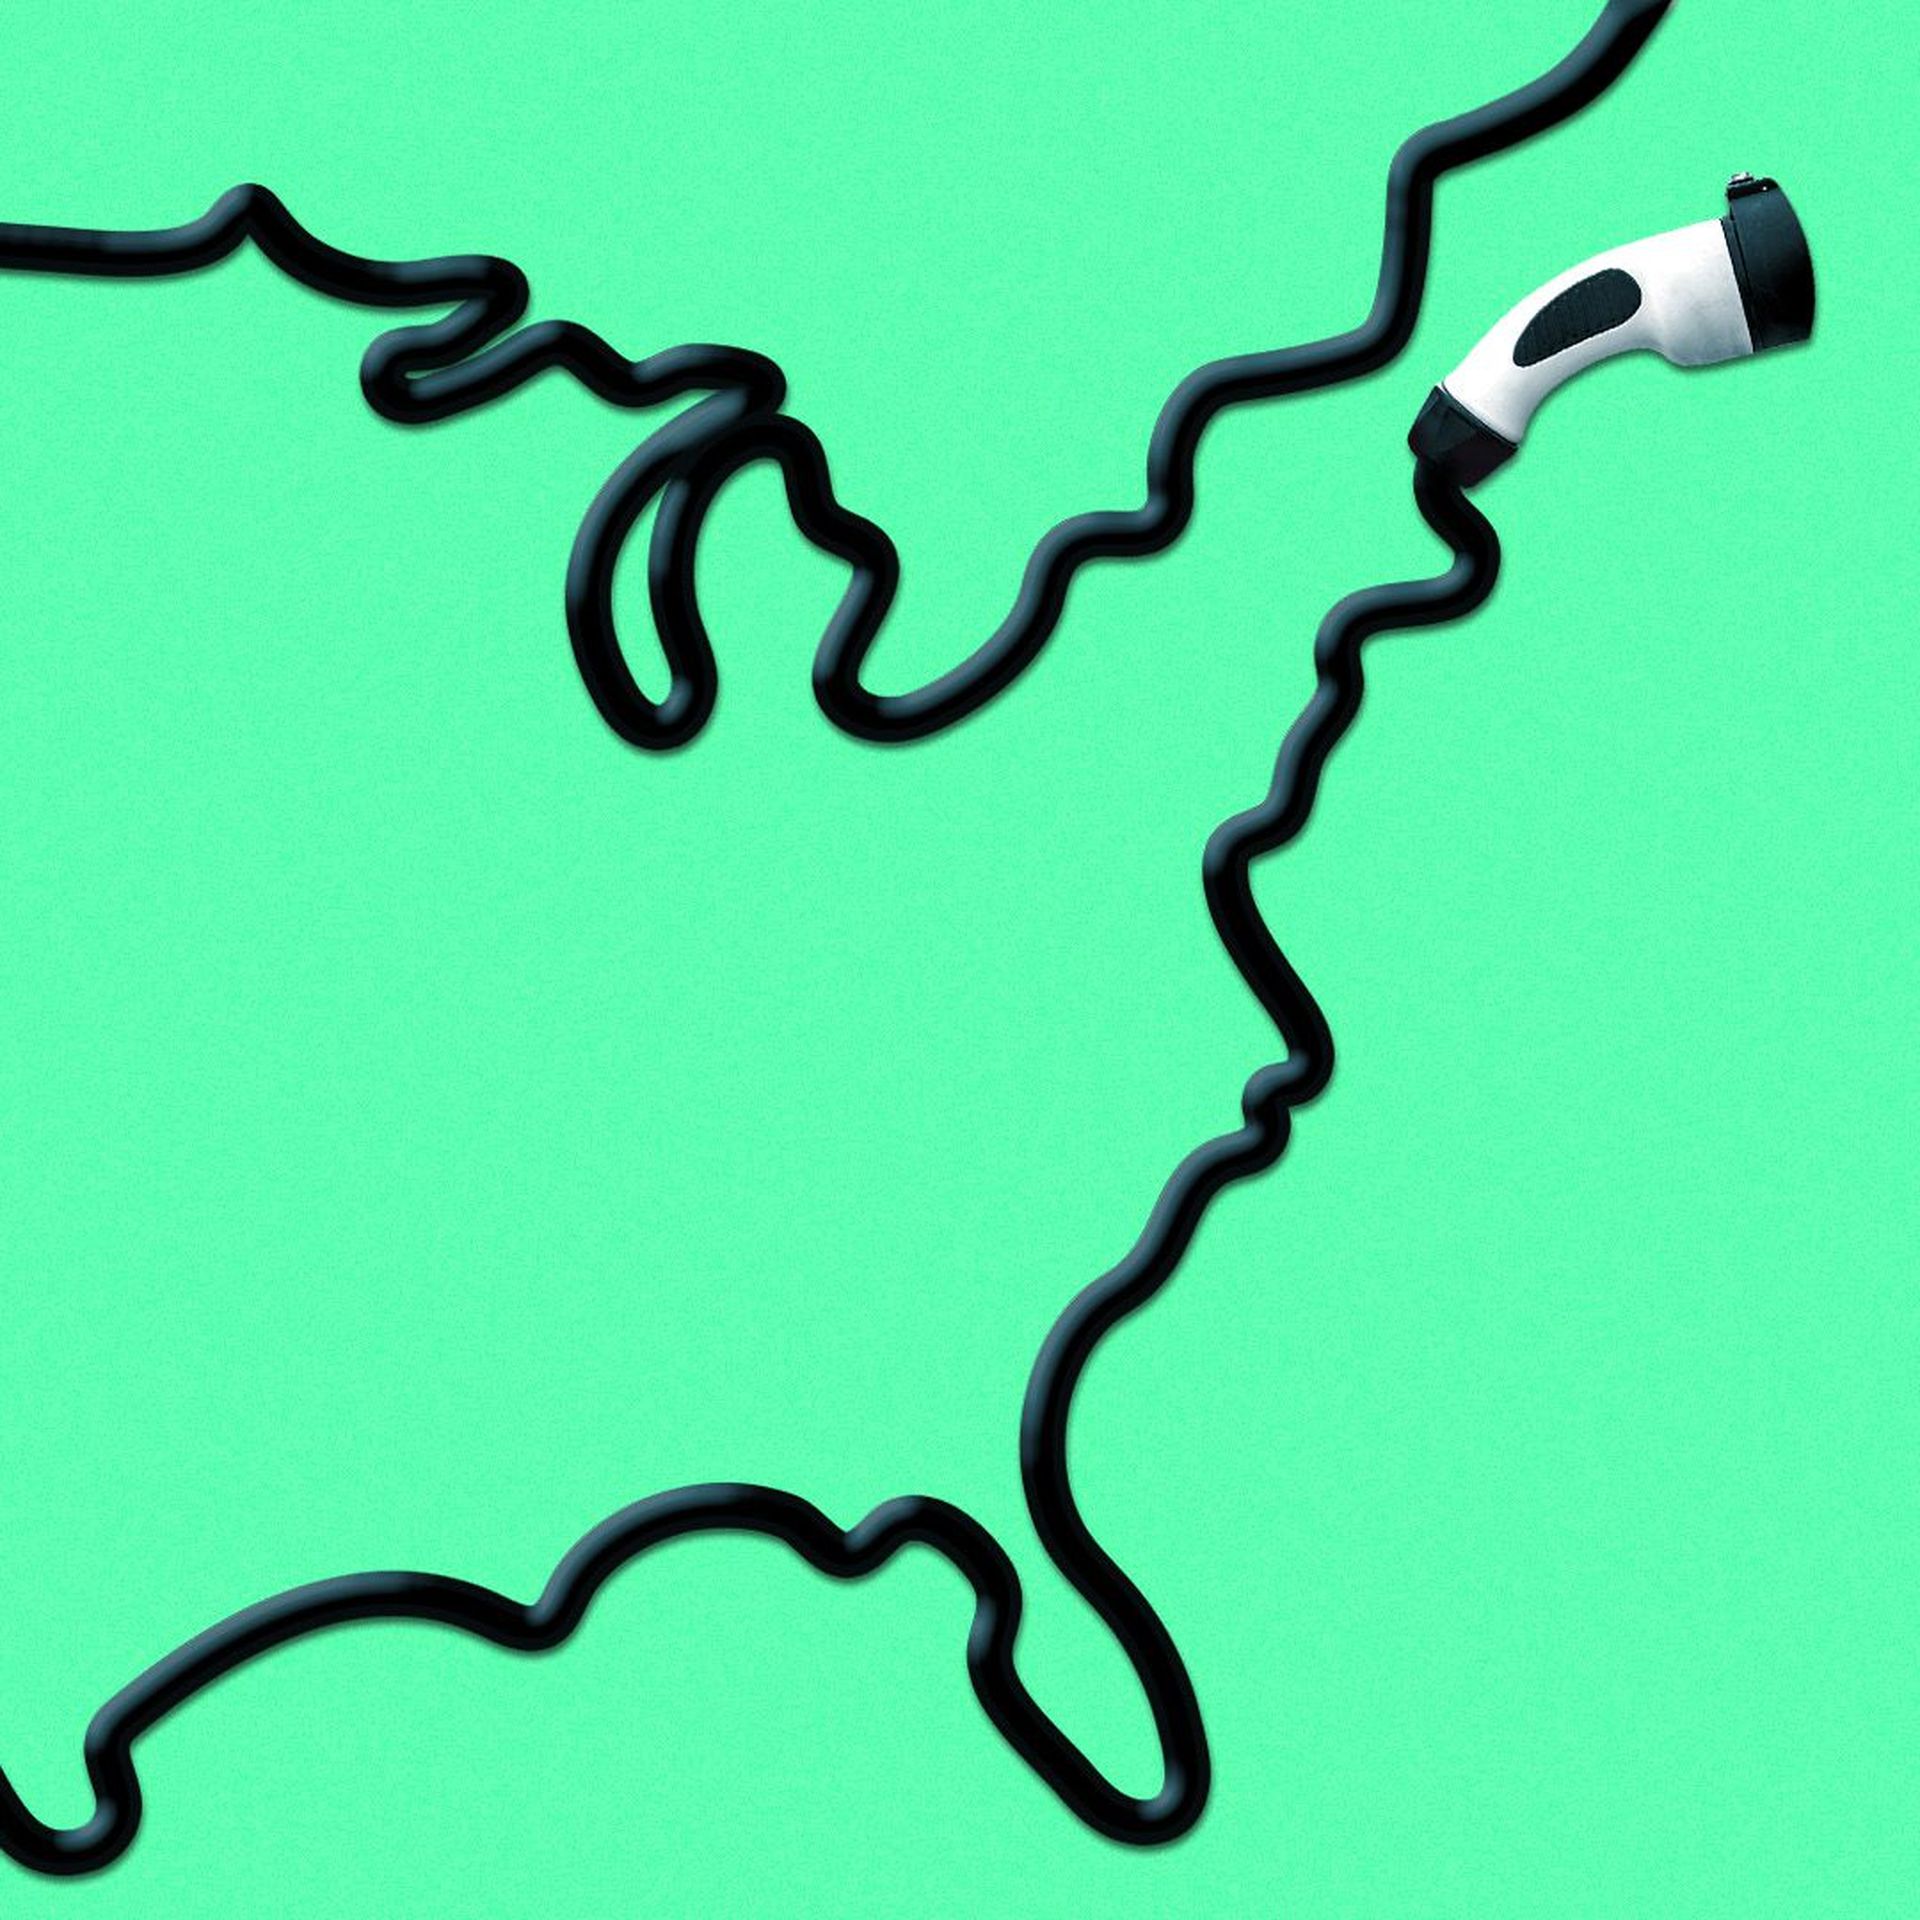 Illustration of an EV charger cord forming the outline of the continental US.